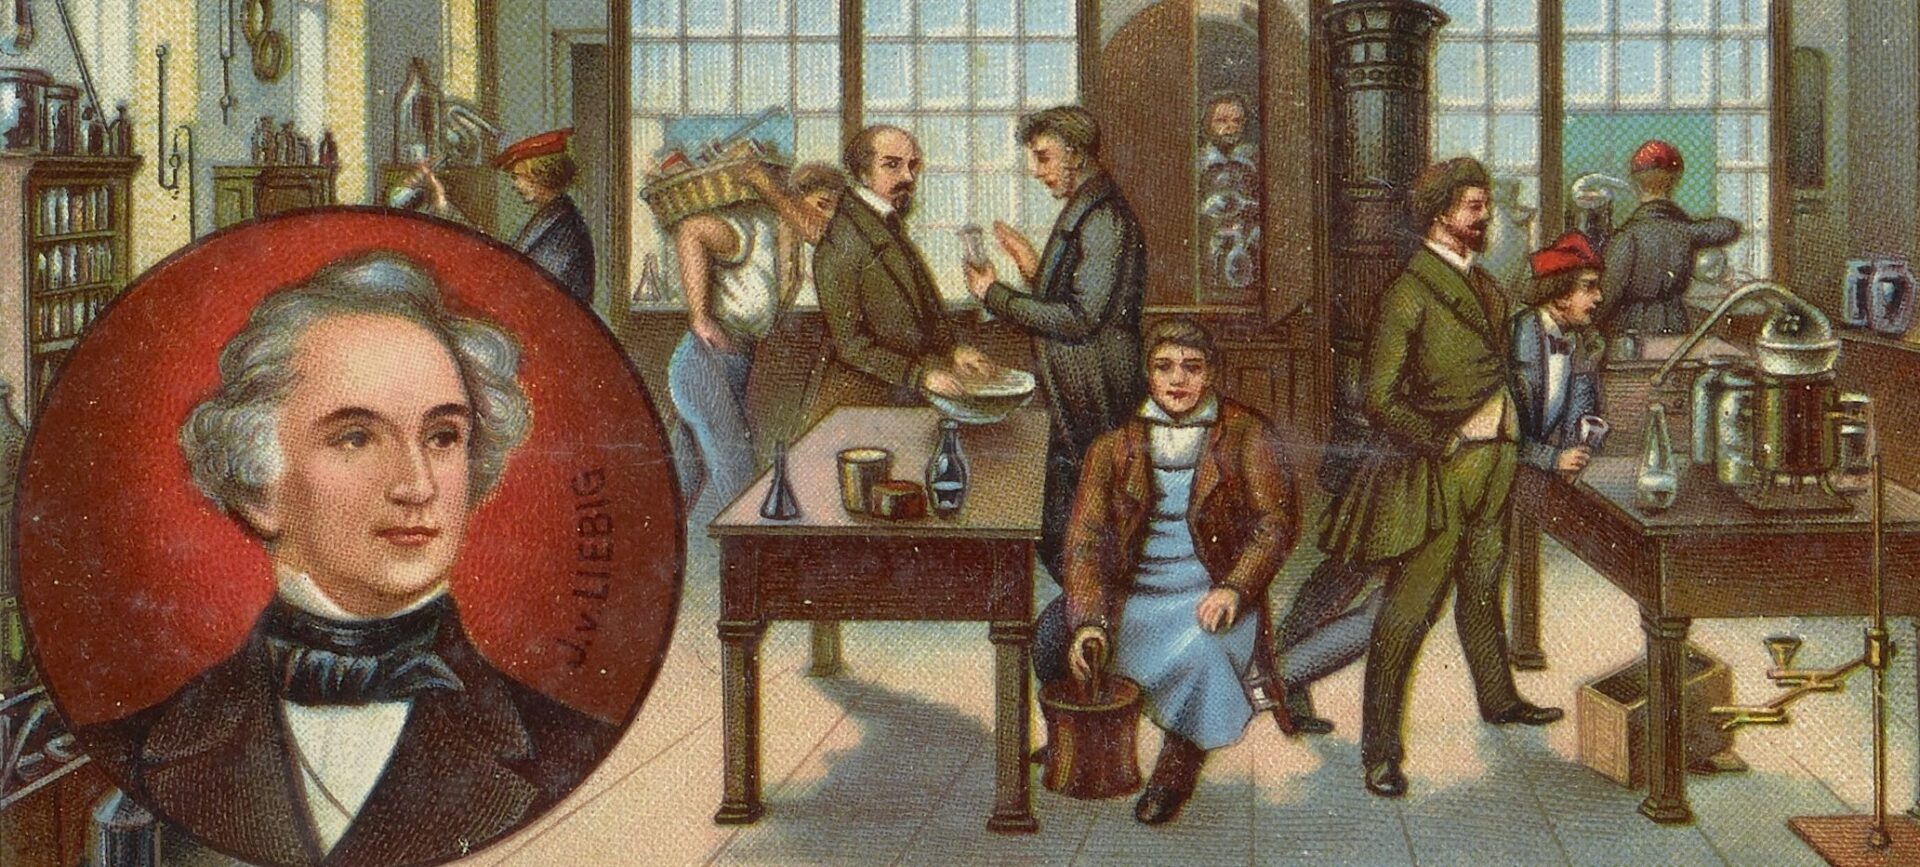 Trade card for Bouillon Oxo en Flacons [Bouillon Oxo in Bottles] with Justus von Liebig in Giessen in 1840